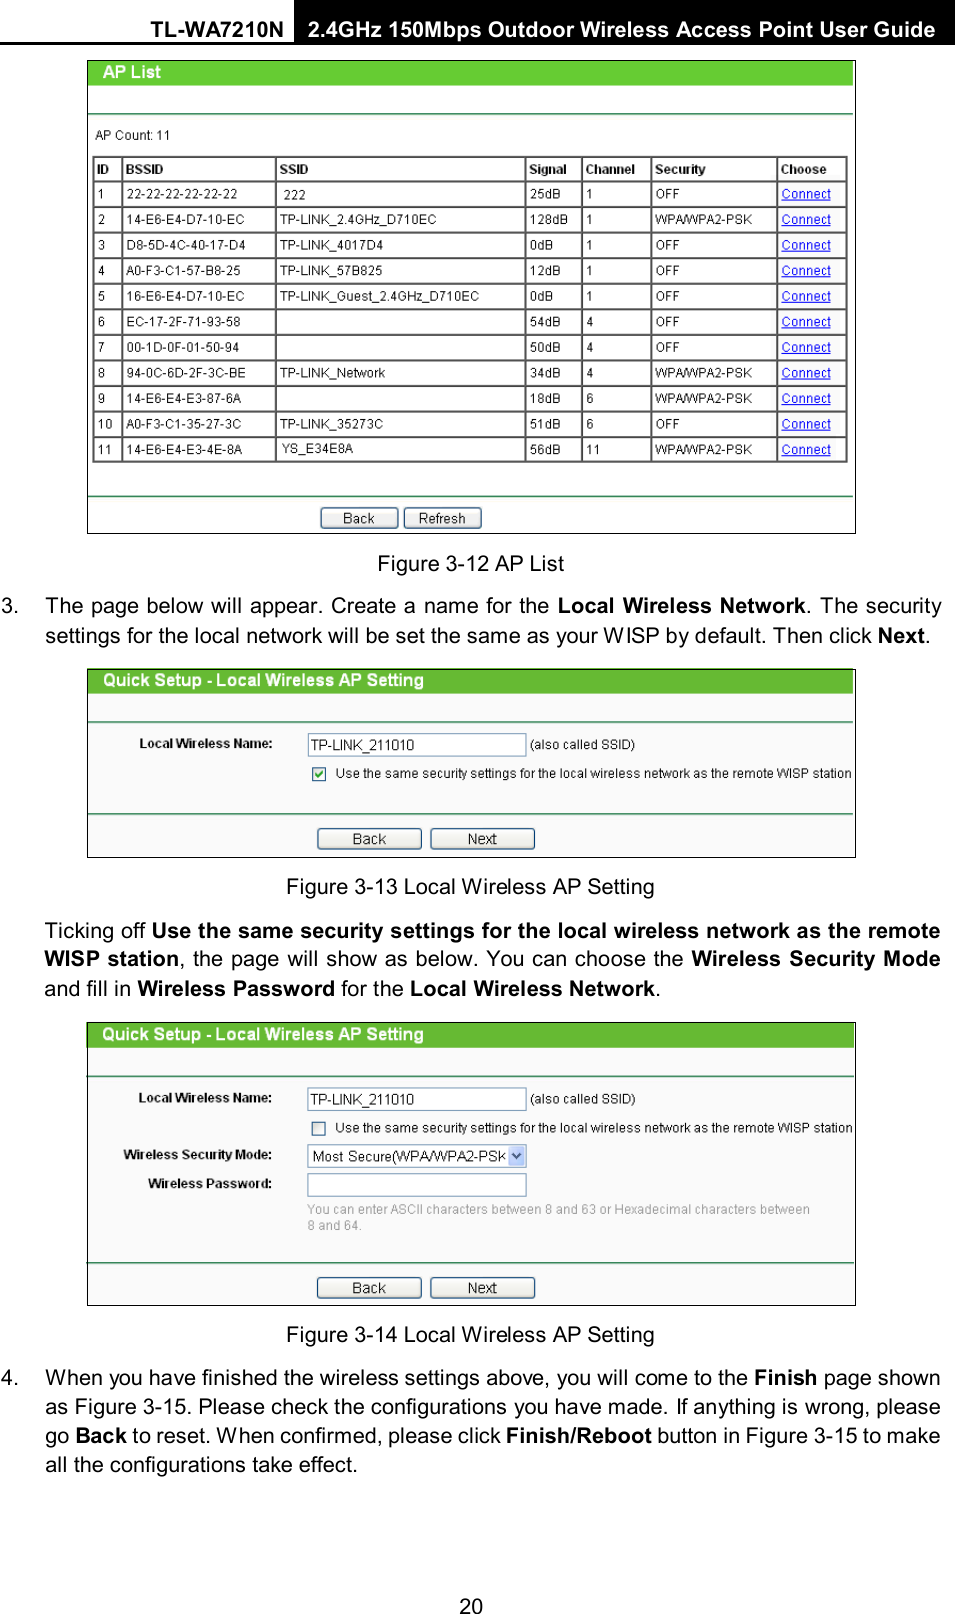 TL-WA7210N 2.4GHz 150Mbps Outdoor Wireless Access Point User Guide  20  Figure 3-12 AP List 3. The page below will appear. Create a name for the Local Wireless Network. The security settings for the local network will be set the same as your W ISP by default. Then click Next.  Figure 3-13 Local Wireless AP Setting Ticking off Use the same security settings for the local wireless network as the remote WISP station, the page will show as below. You can choose the Wireless Security Mode and fill in Wireless Password for the Local Wireless Network.  Figure 3-14 Local Wireless AP Setting 4. When you have finished the wireless settings above, you will come to the Finish page shown as Figure 3-15. Please check the configurations you have made. If anything is wrong, please go Back to reset. When confirmed, please click Finish/Reboot button in Figure 3-15 to make all the configurations take effect. 